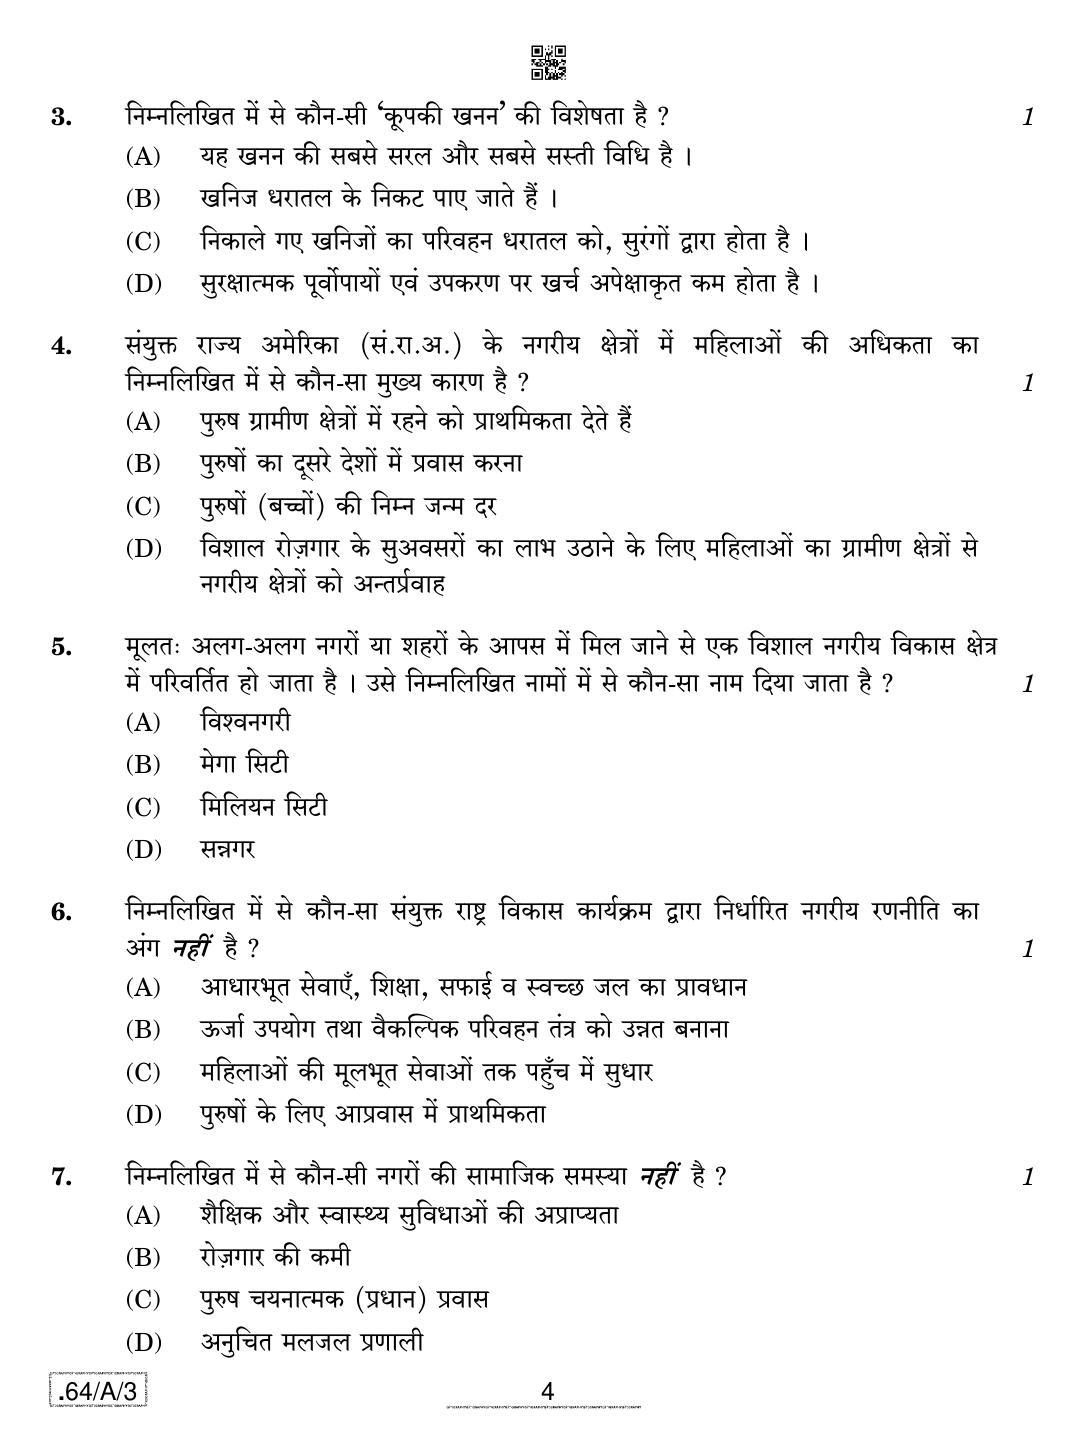 CBSE Class 12 64-C-3 - Geography 2020 Compartment Question Paper - Page 4